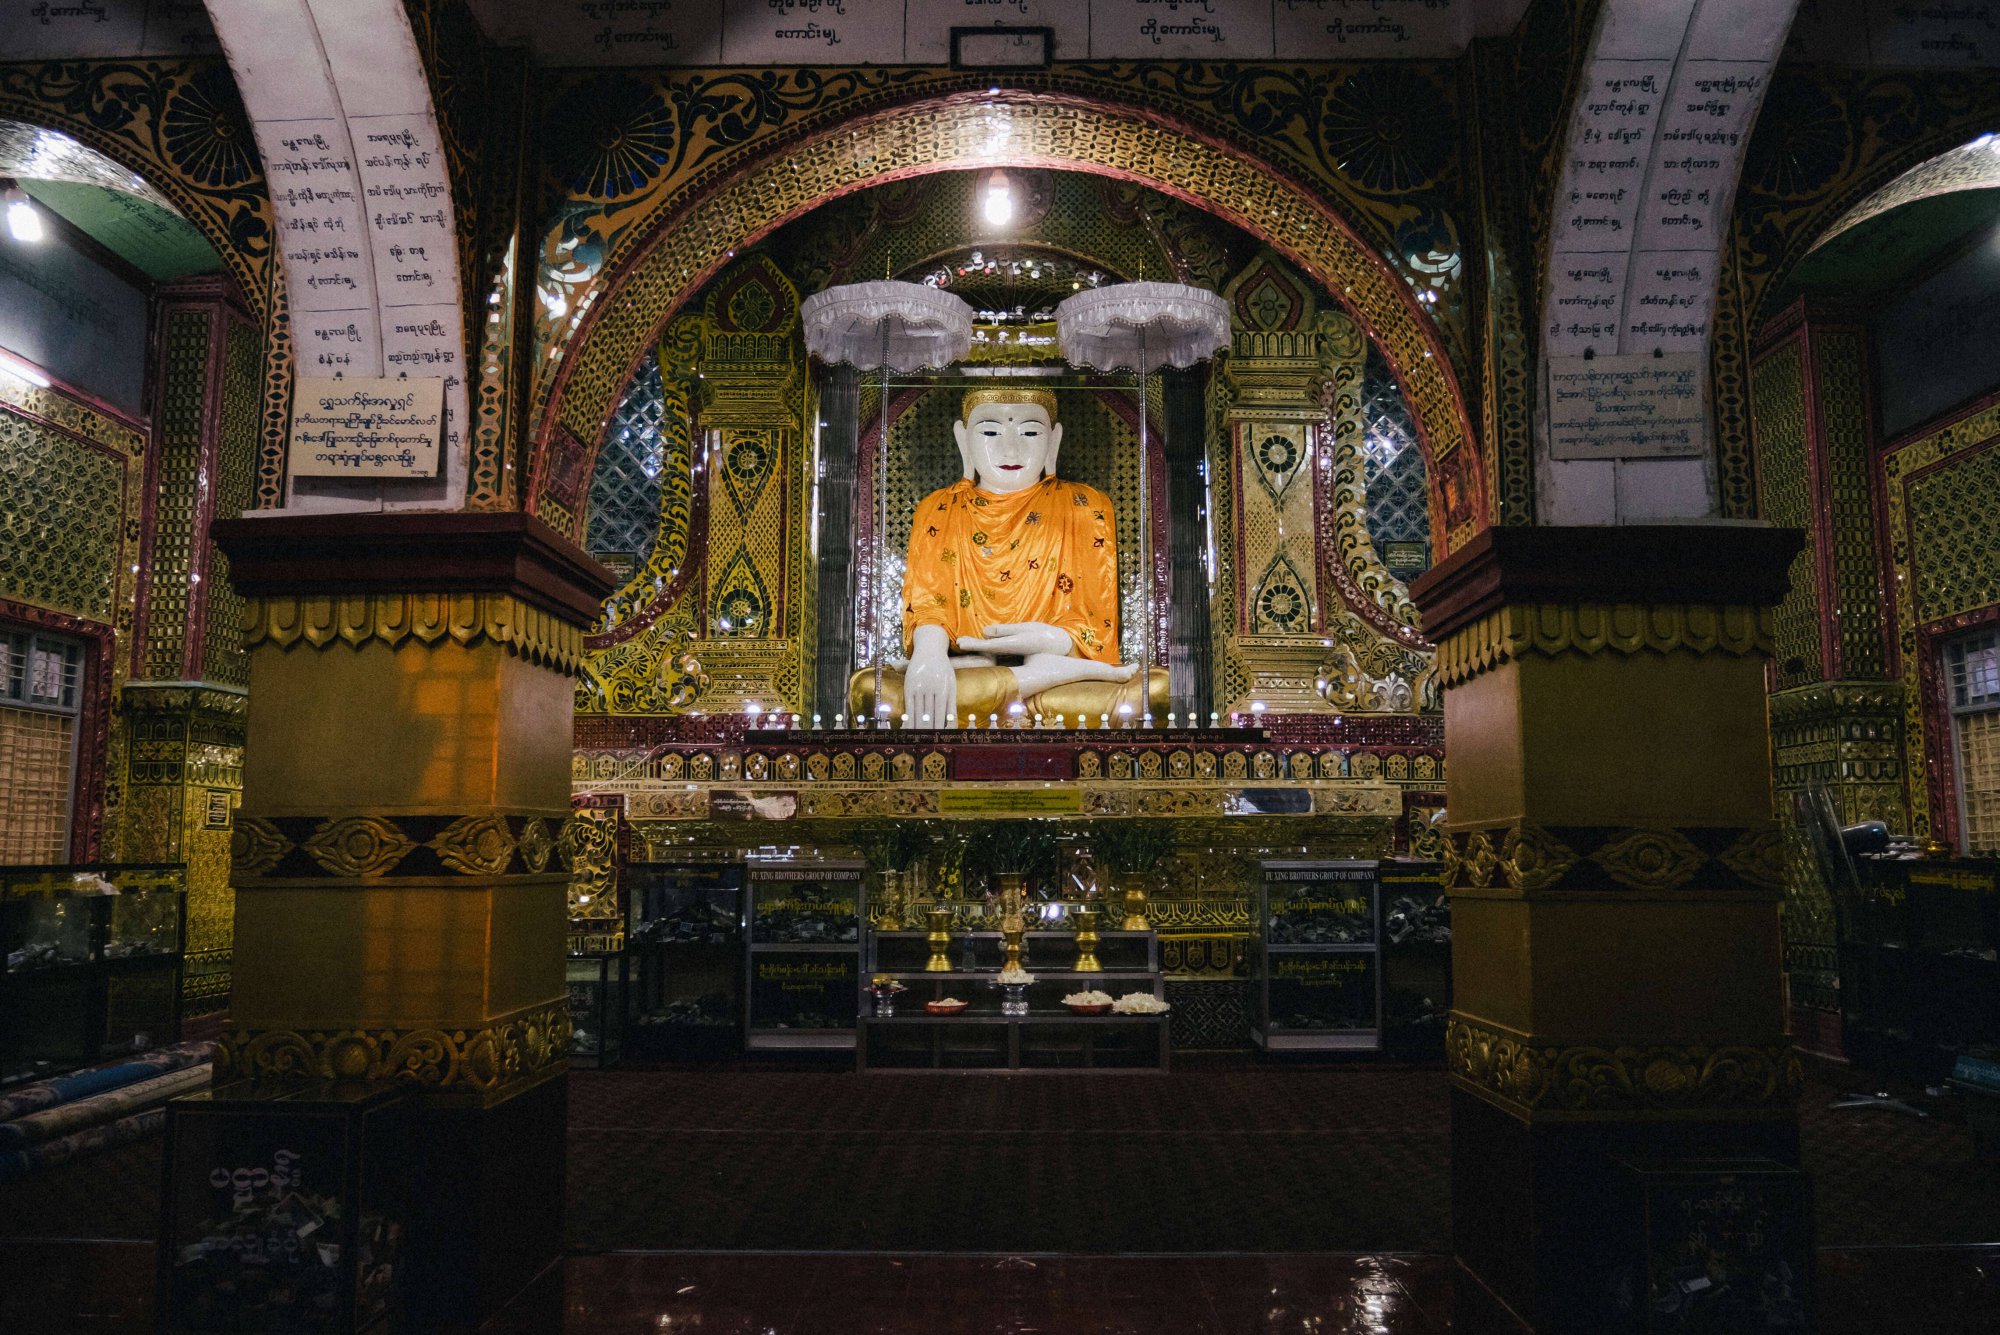 The Temple route in Myanmar